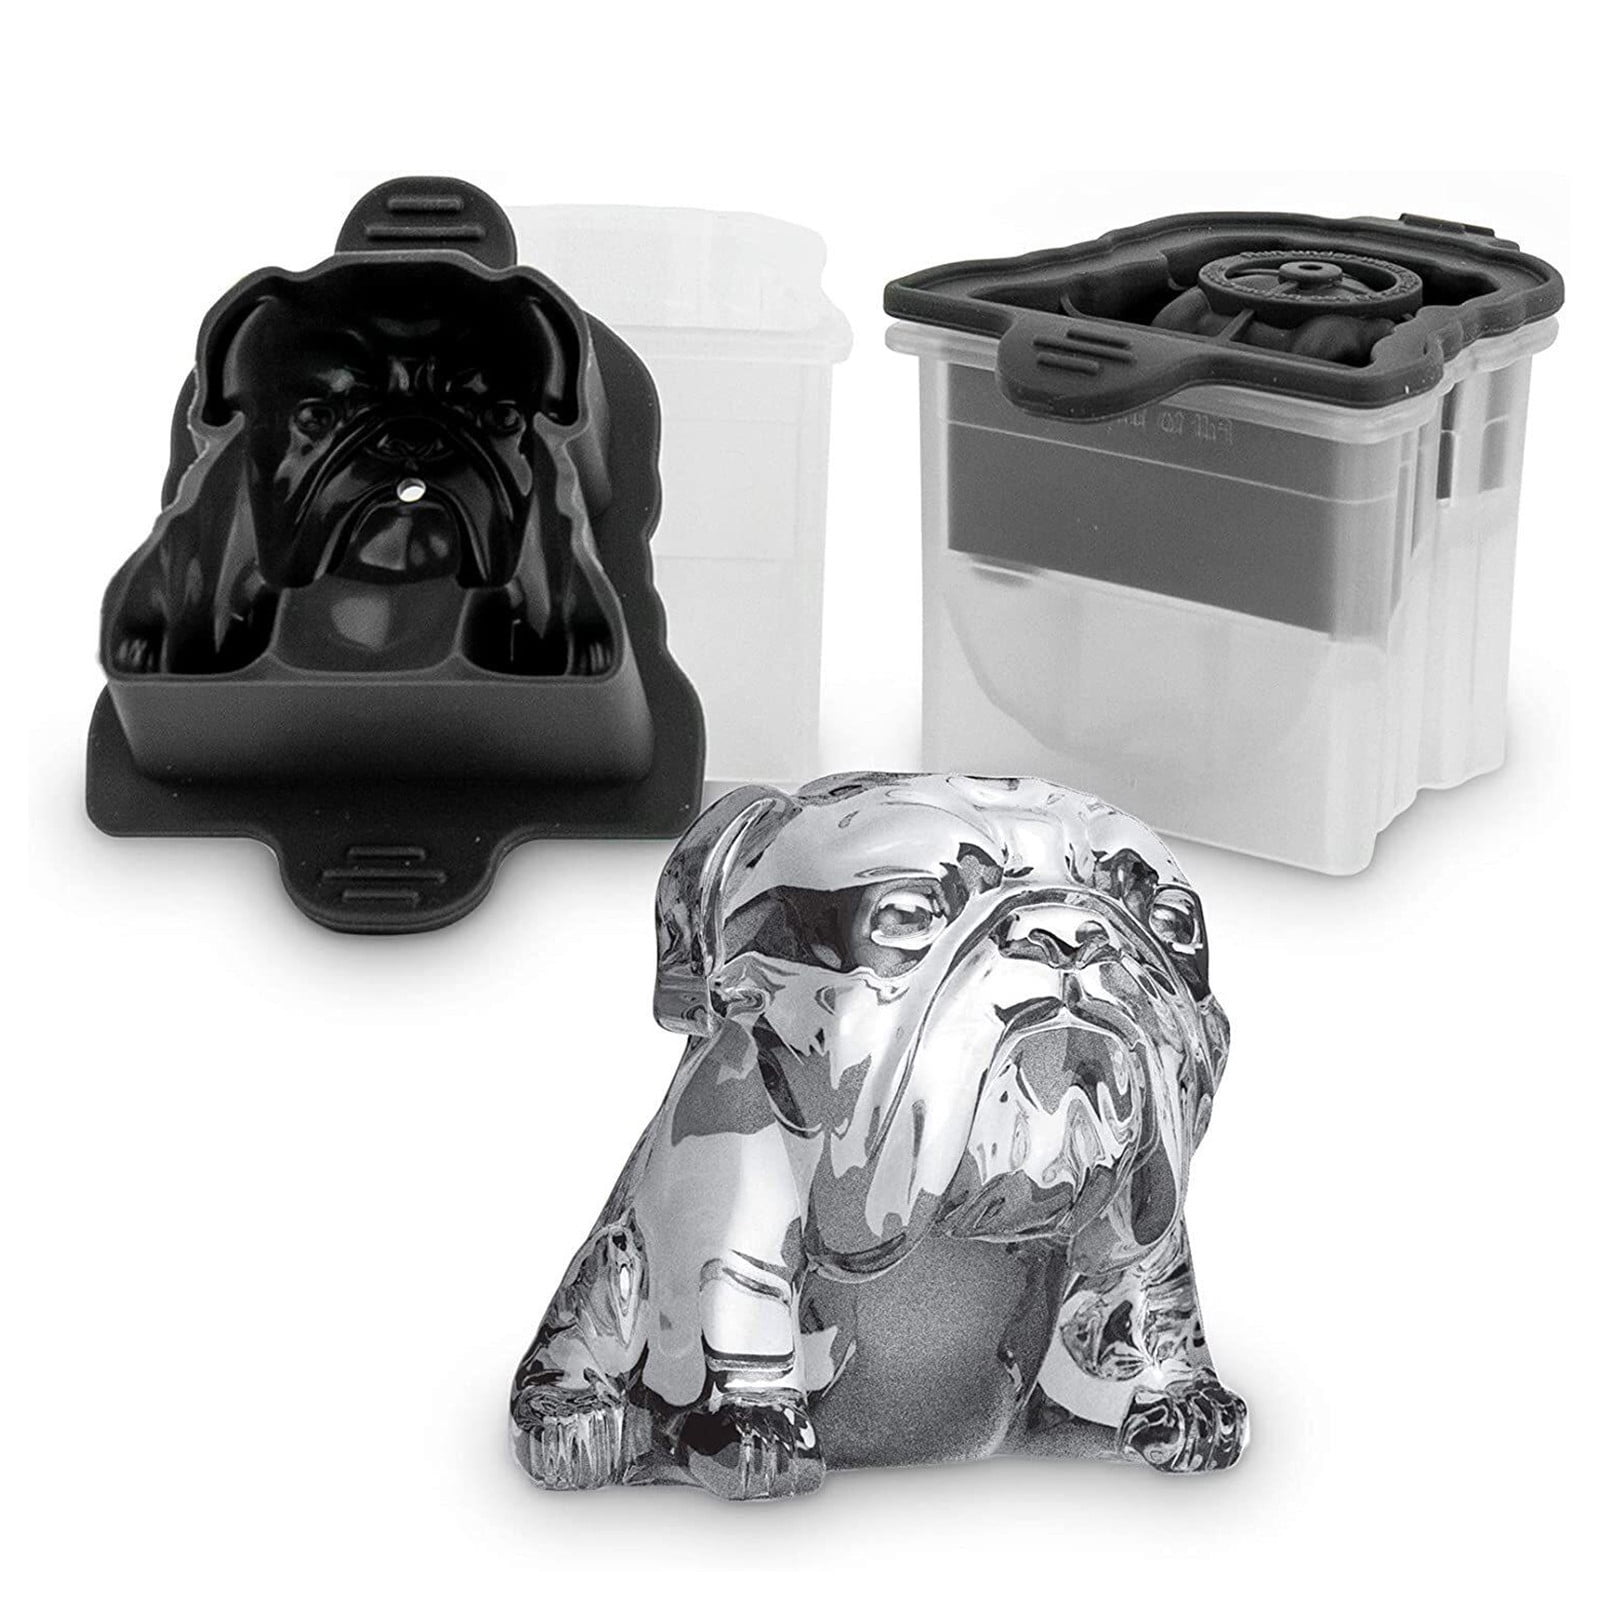 1pc, Silicone Ice Cube Tray Bulldog Ice Mold Creative Whiskey Ice Cube Mold Ice  Maker Mold With Spill-resistant Lid Fancy & Cute Ice Cube Container For  Whiskey Party Champagne